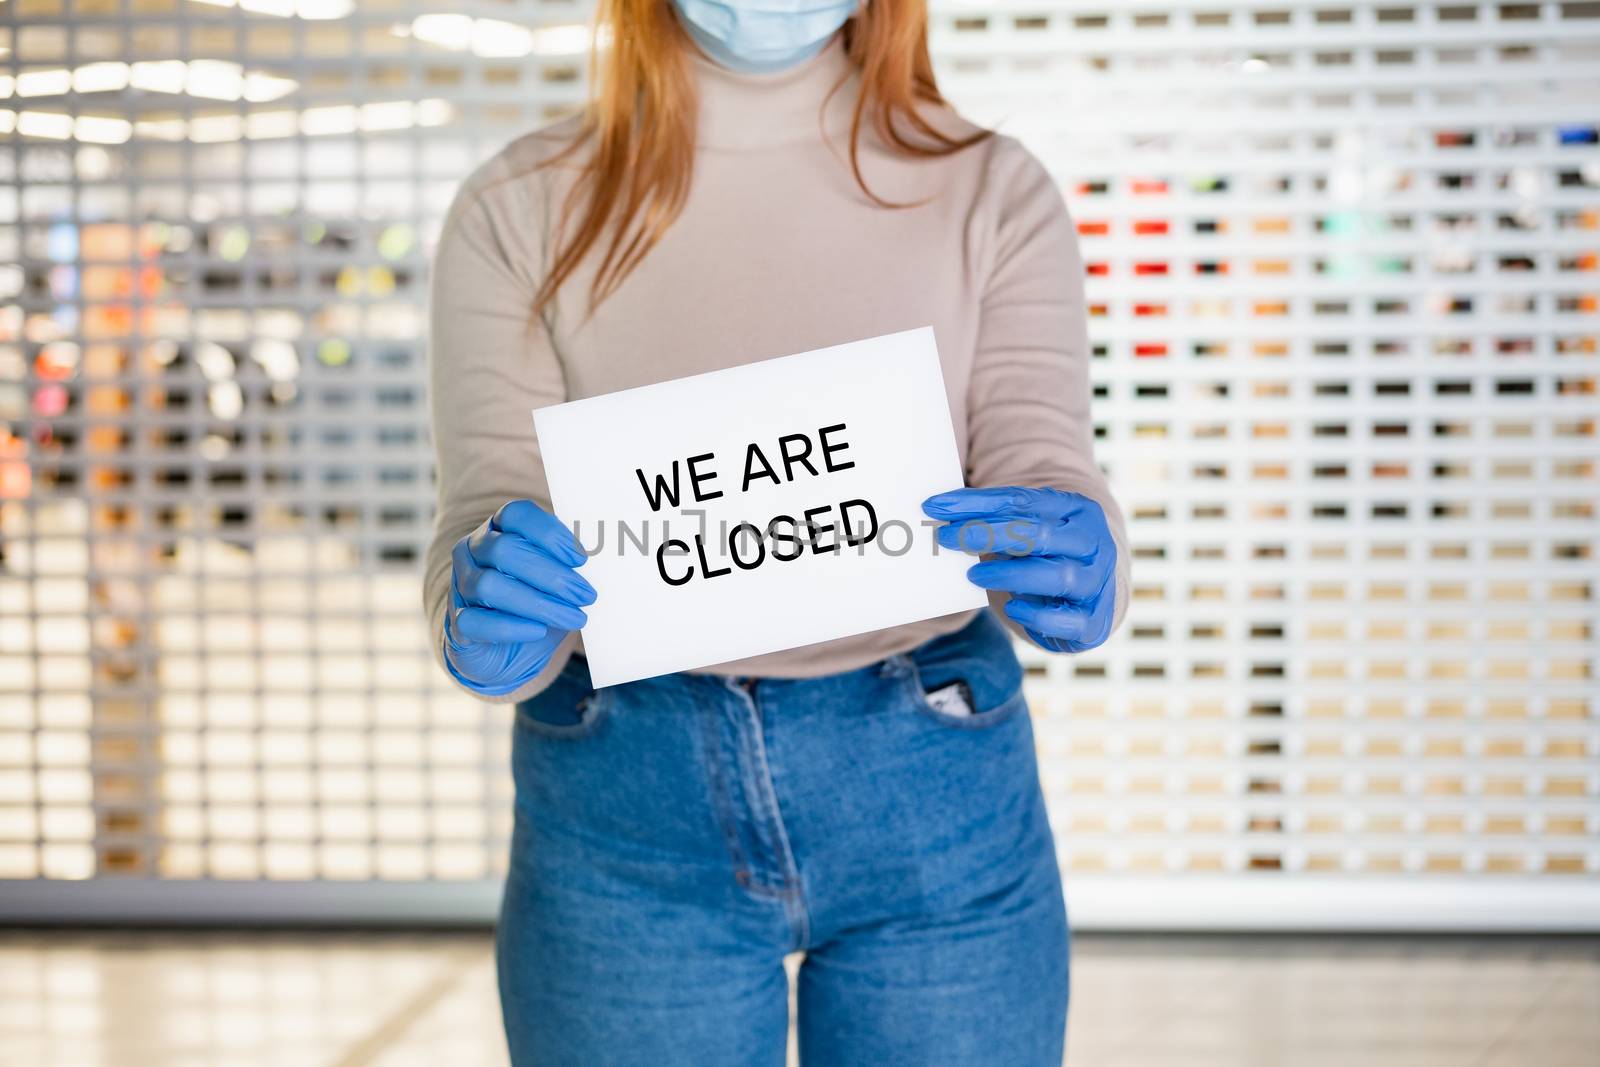 "We are closed" sign in woman's hands. by photoboyko